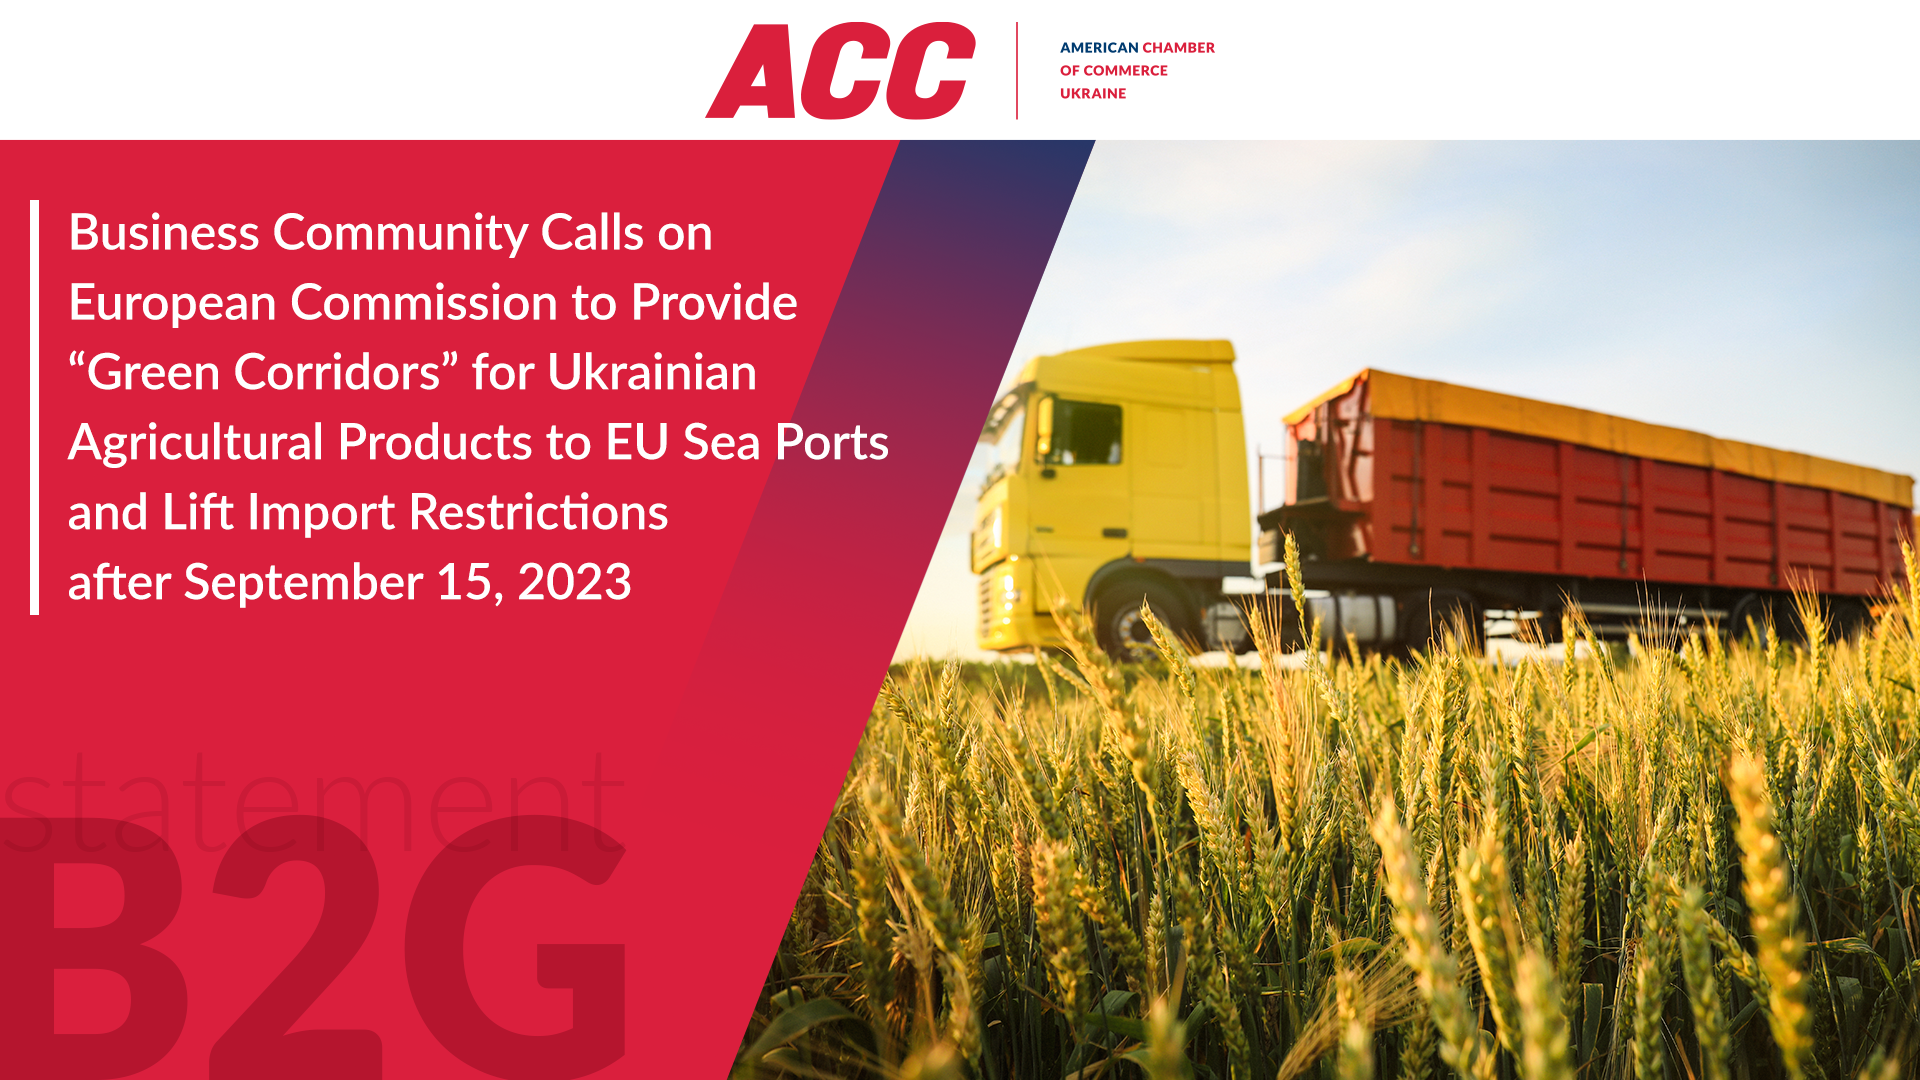 Business Community Calls on European Commission to Provide “Green Corridors” for Ukrainian Agricultural Products to EU Sea Ports and Lift Import Restrictions after September 15, 2023